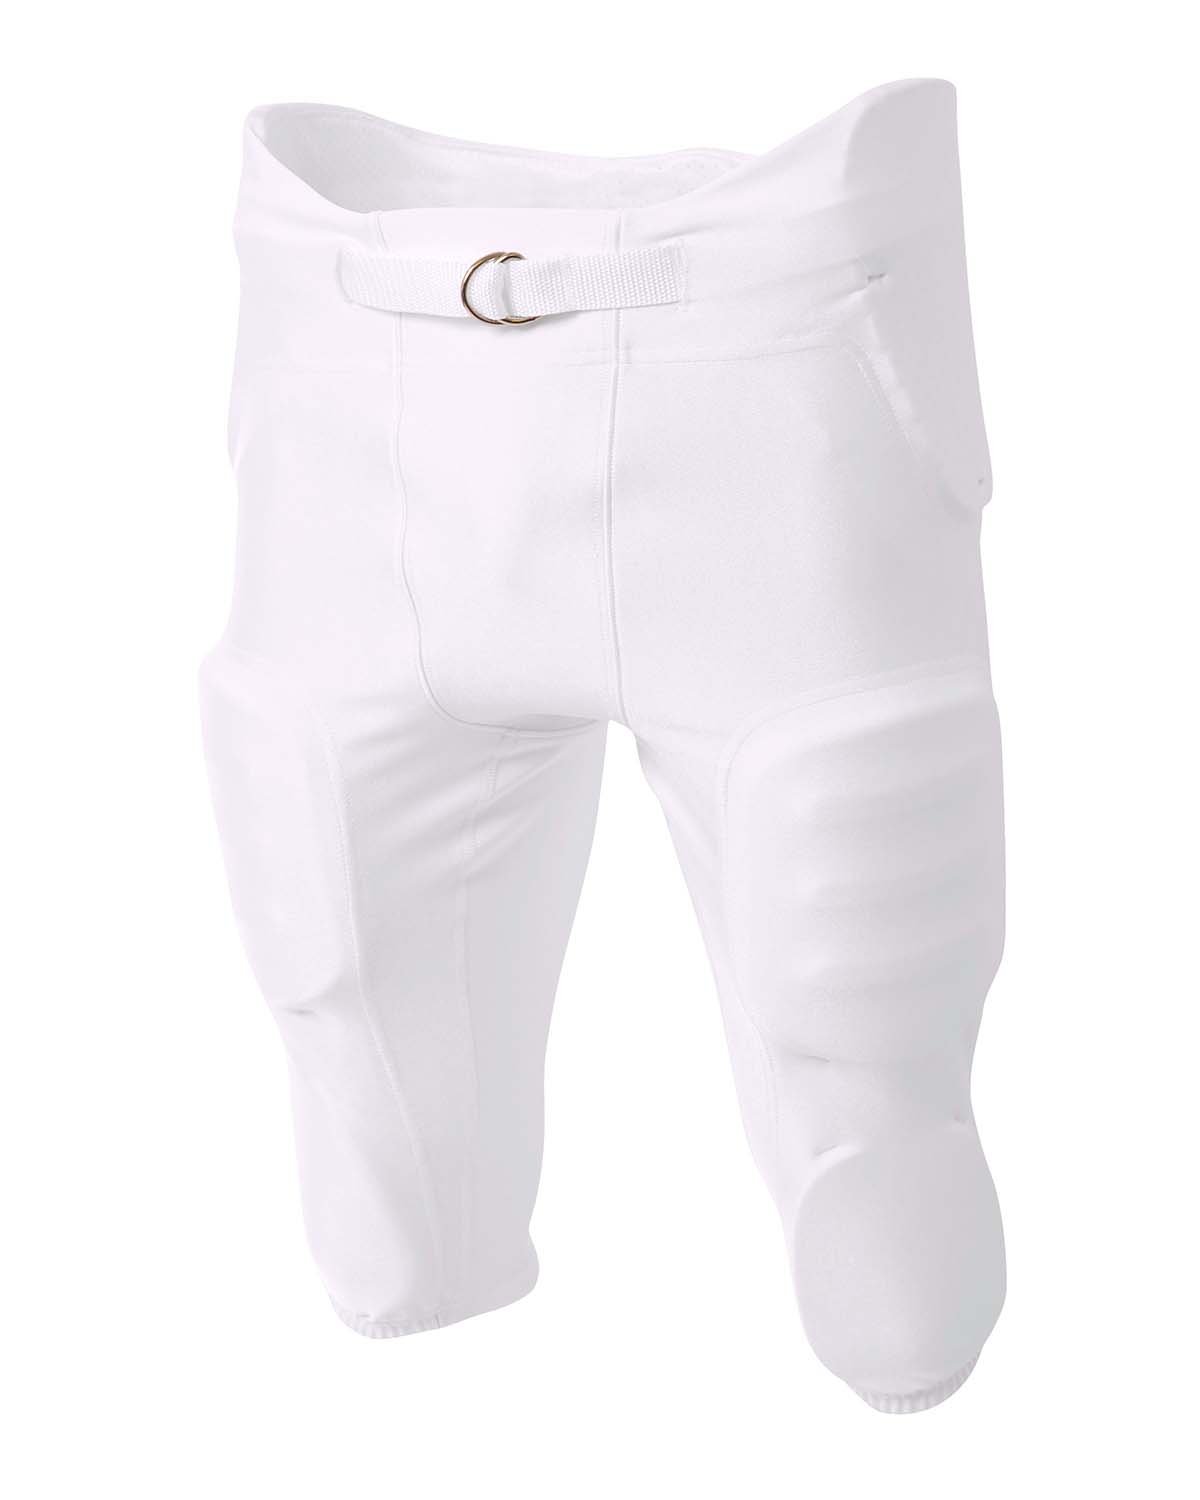 Boys Integrated Zone Football Pant-A4